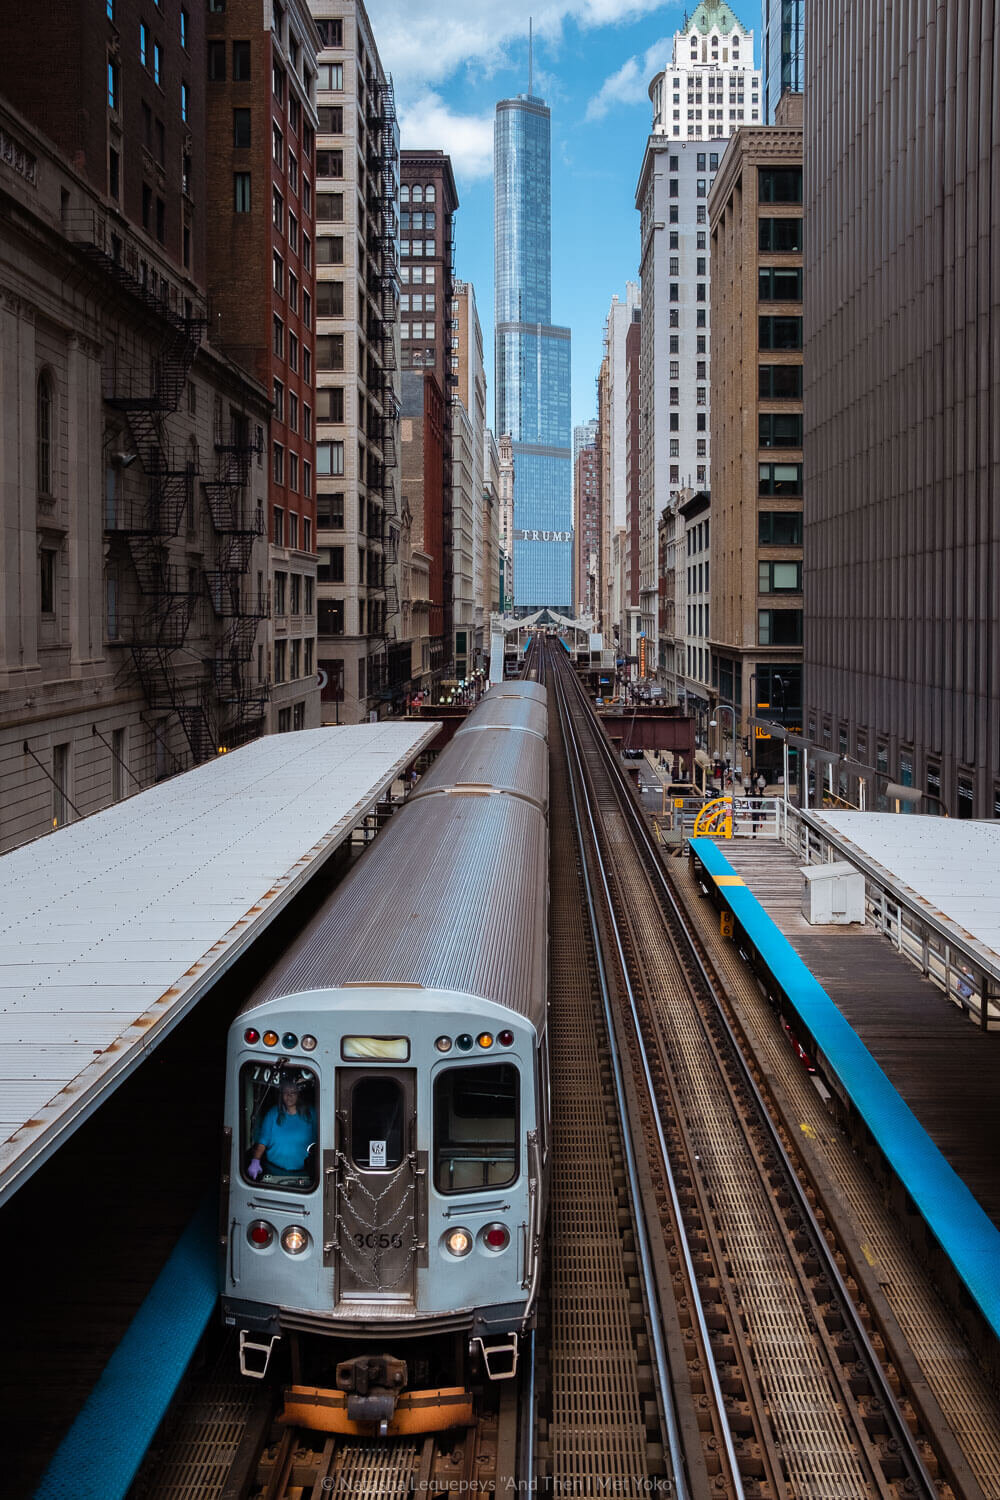 CTA trains, Chicago, USA. Travel photography and guide by © Natasha Lequepeys for "And Then I Met Yoko". #chicago #usa #travelblog #travelphotography